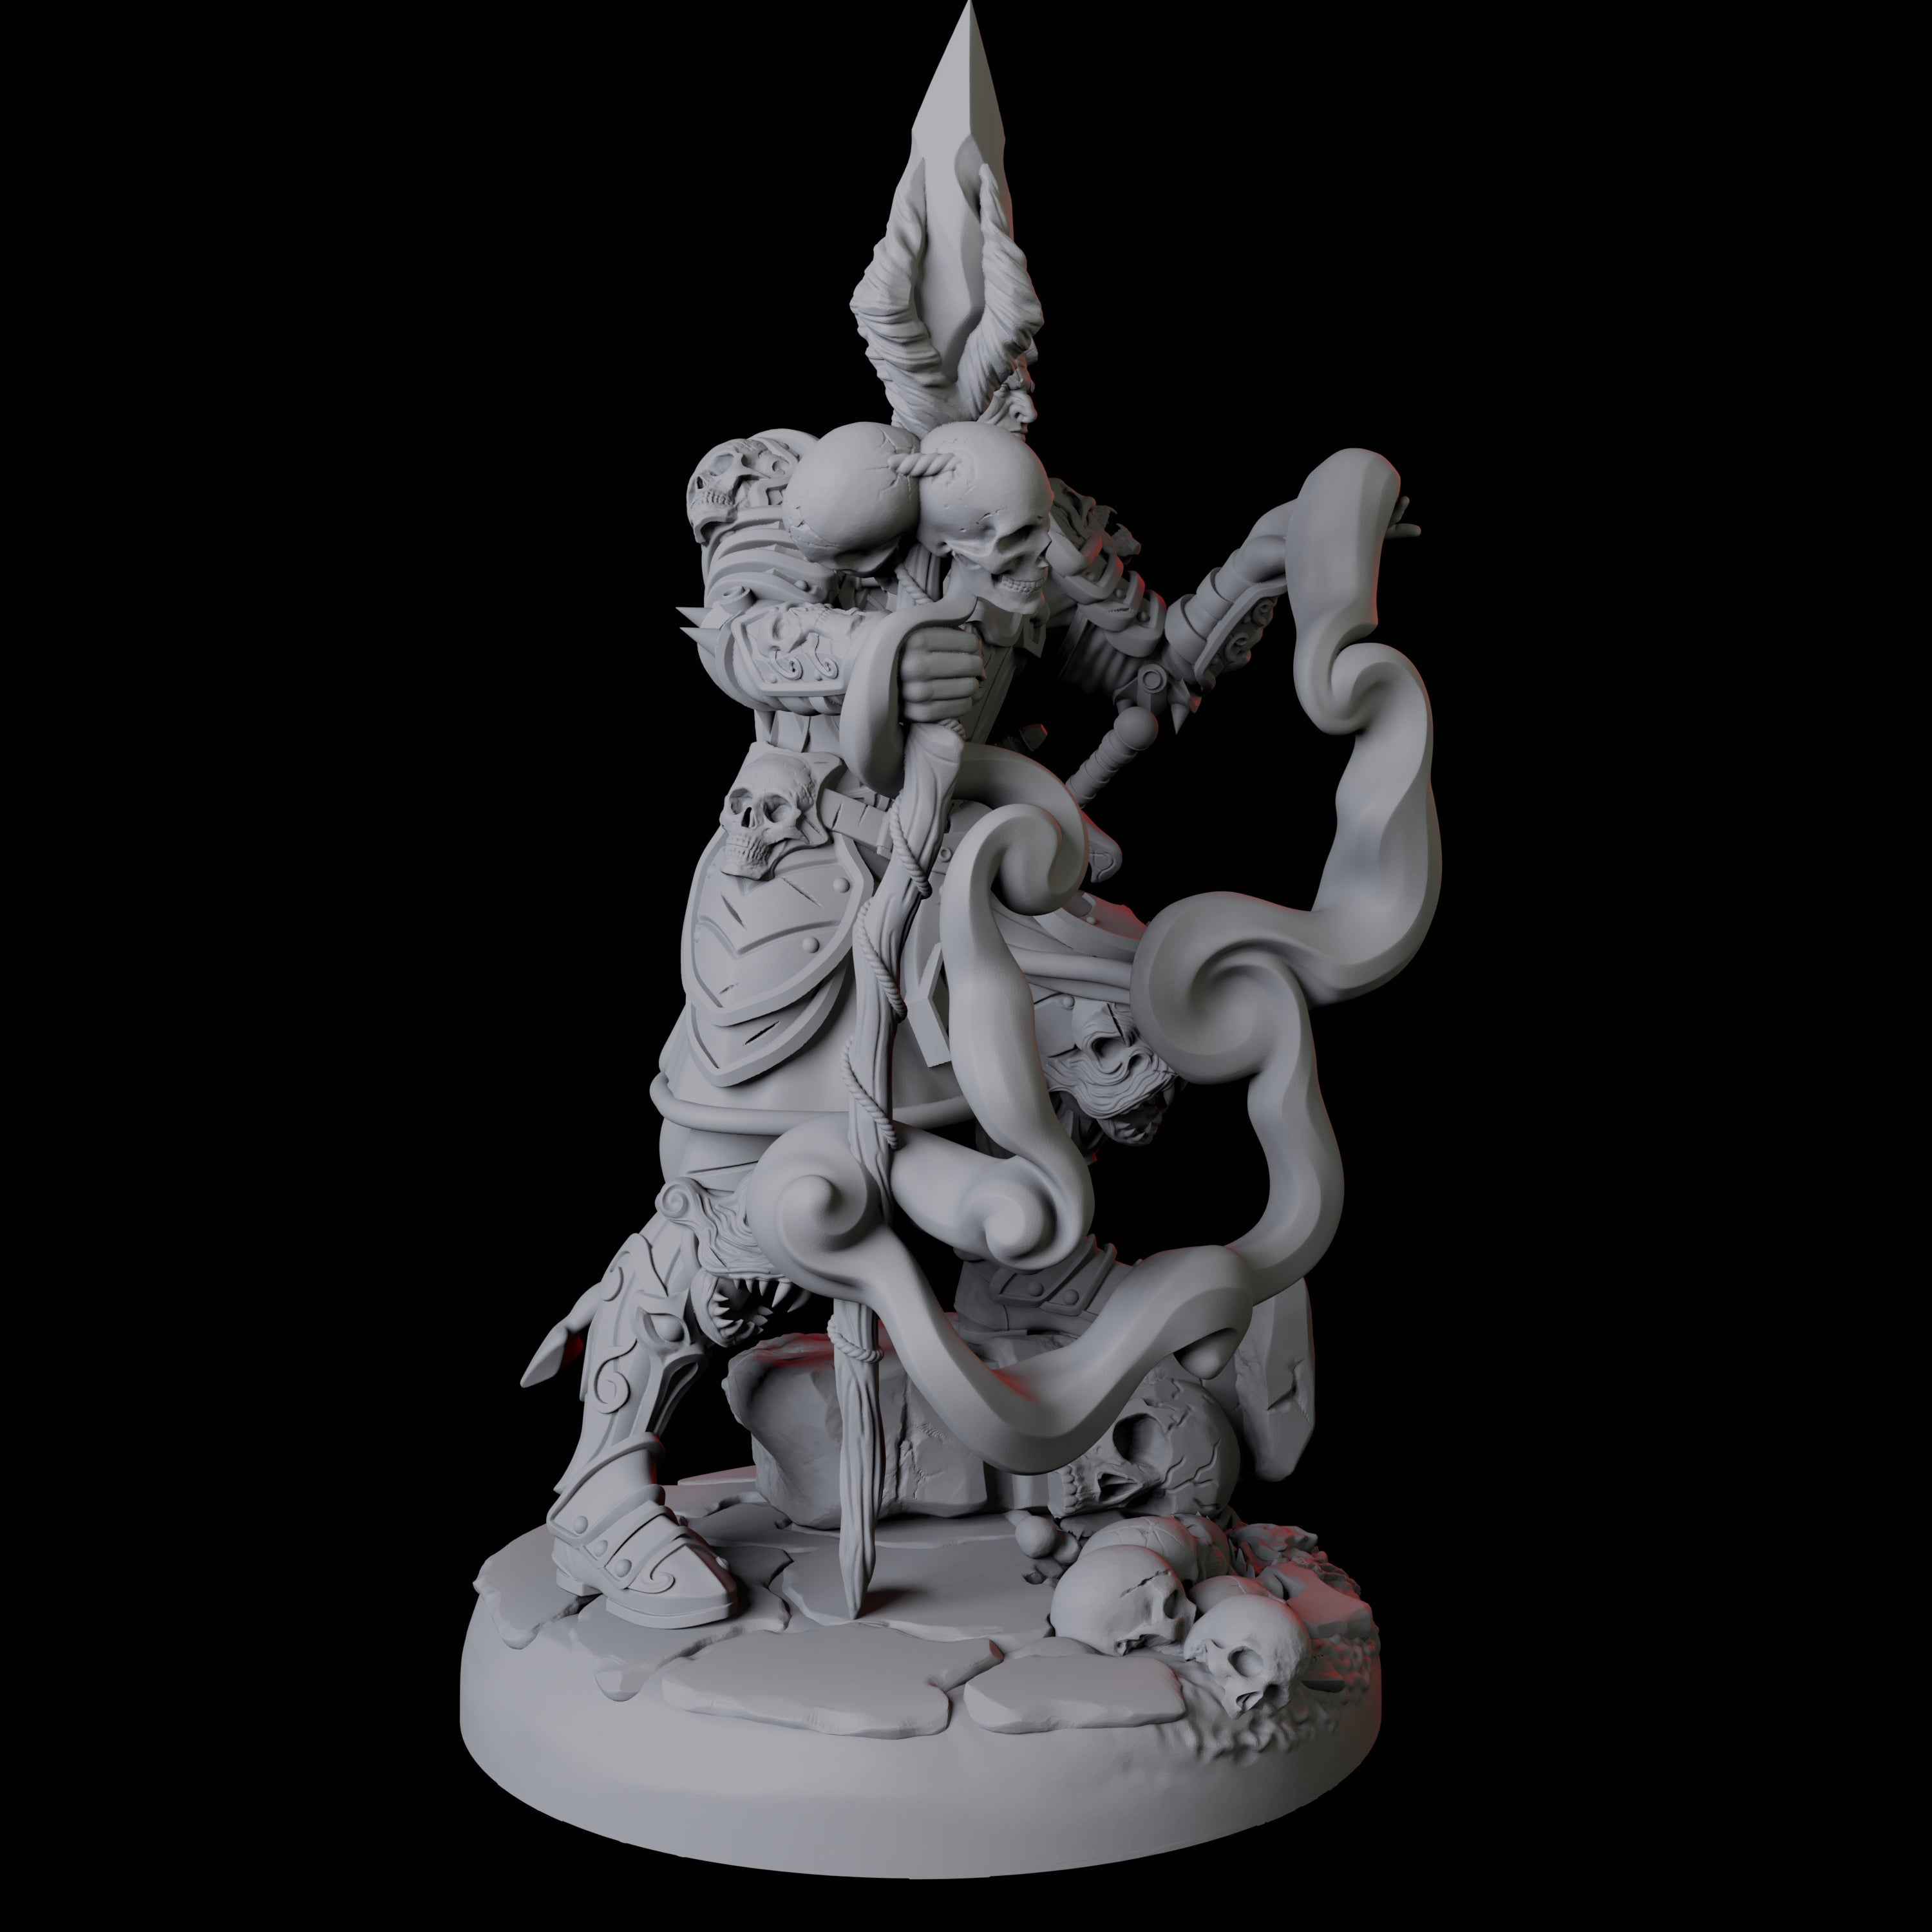 Threatening Bearded Devil D Miniature for Dungeons and Dragons, Pathfinder or other TTRPGs